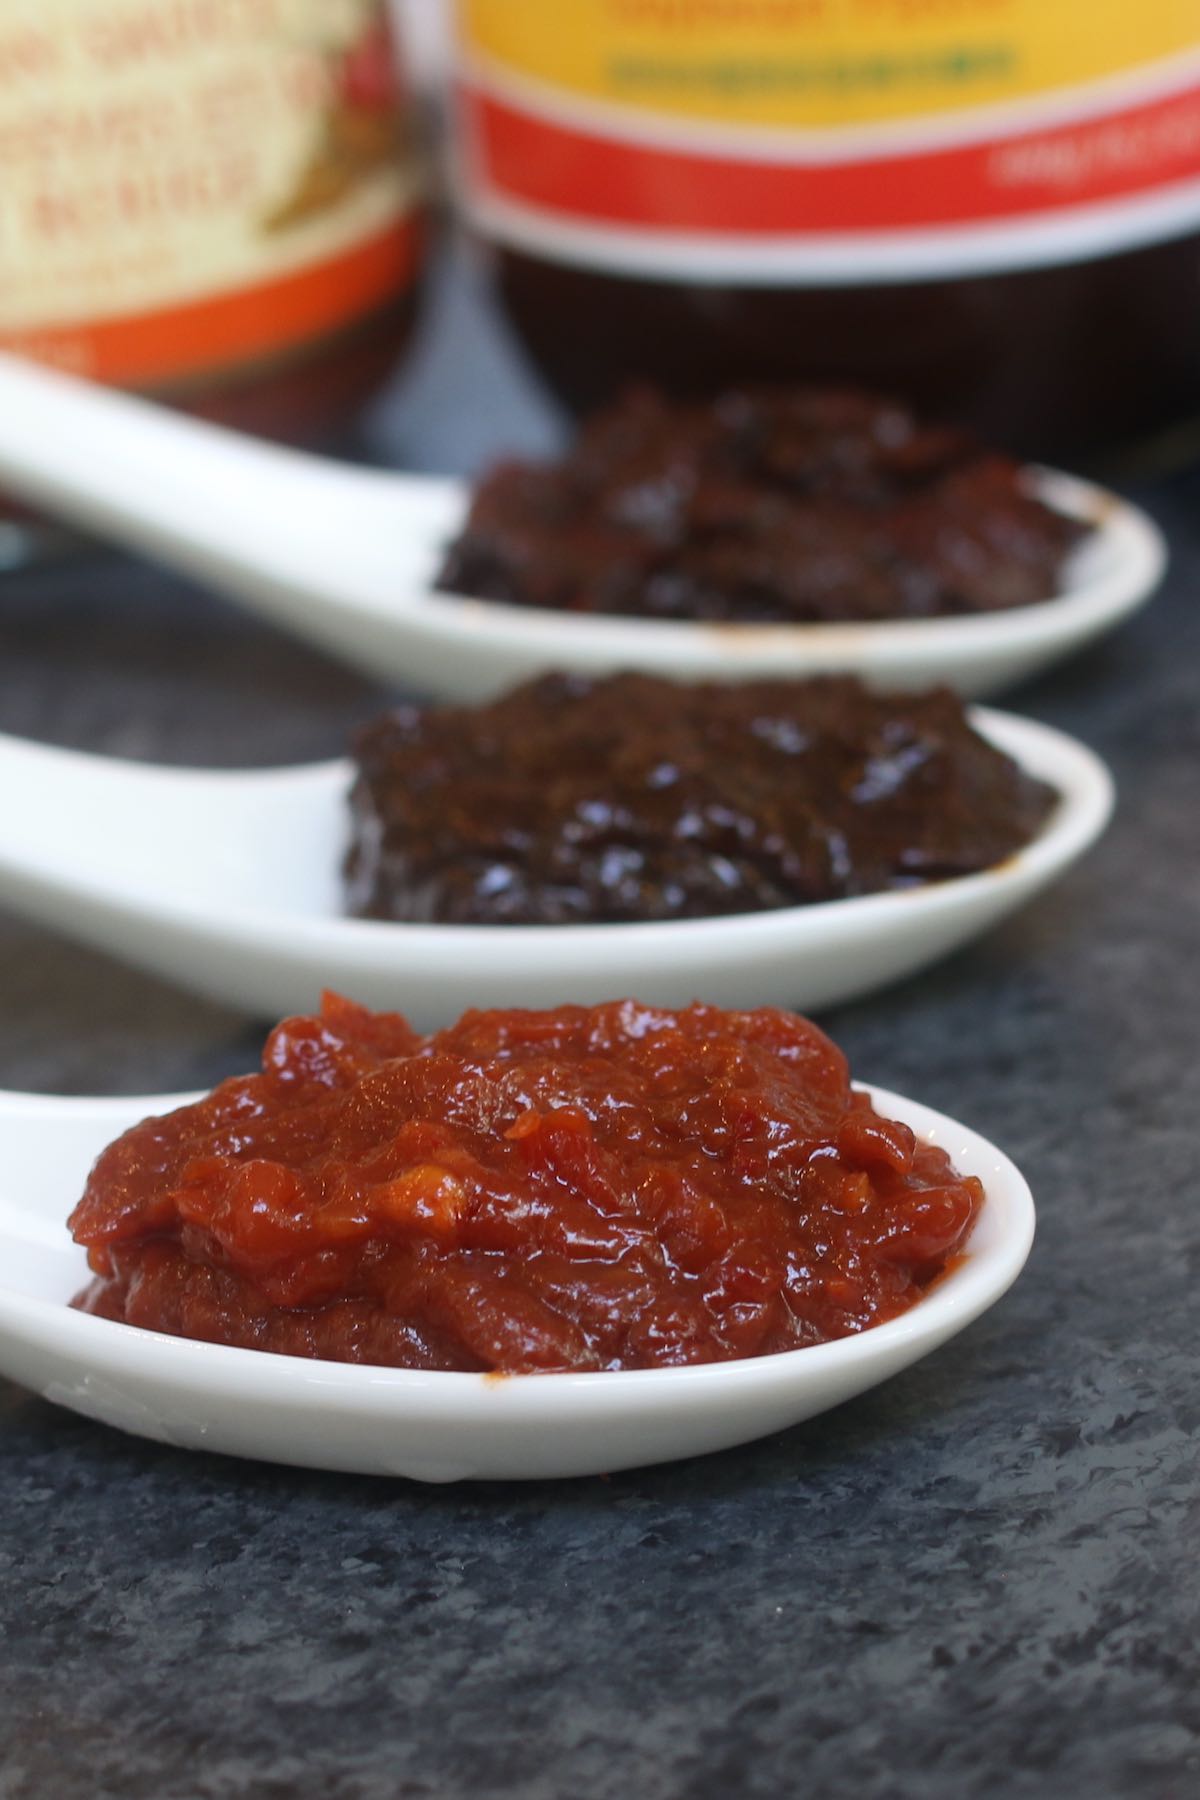 Doubanjiang is a Chinese bean paste with savory and sometimes spicy accents that makes many popular Chinese stir-fry dishes. Learn how to make doubanjiang substitute with 2 simple ingredients. 